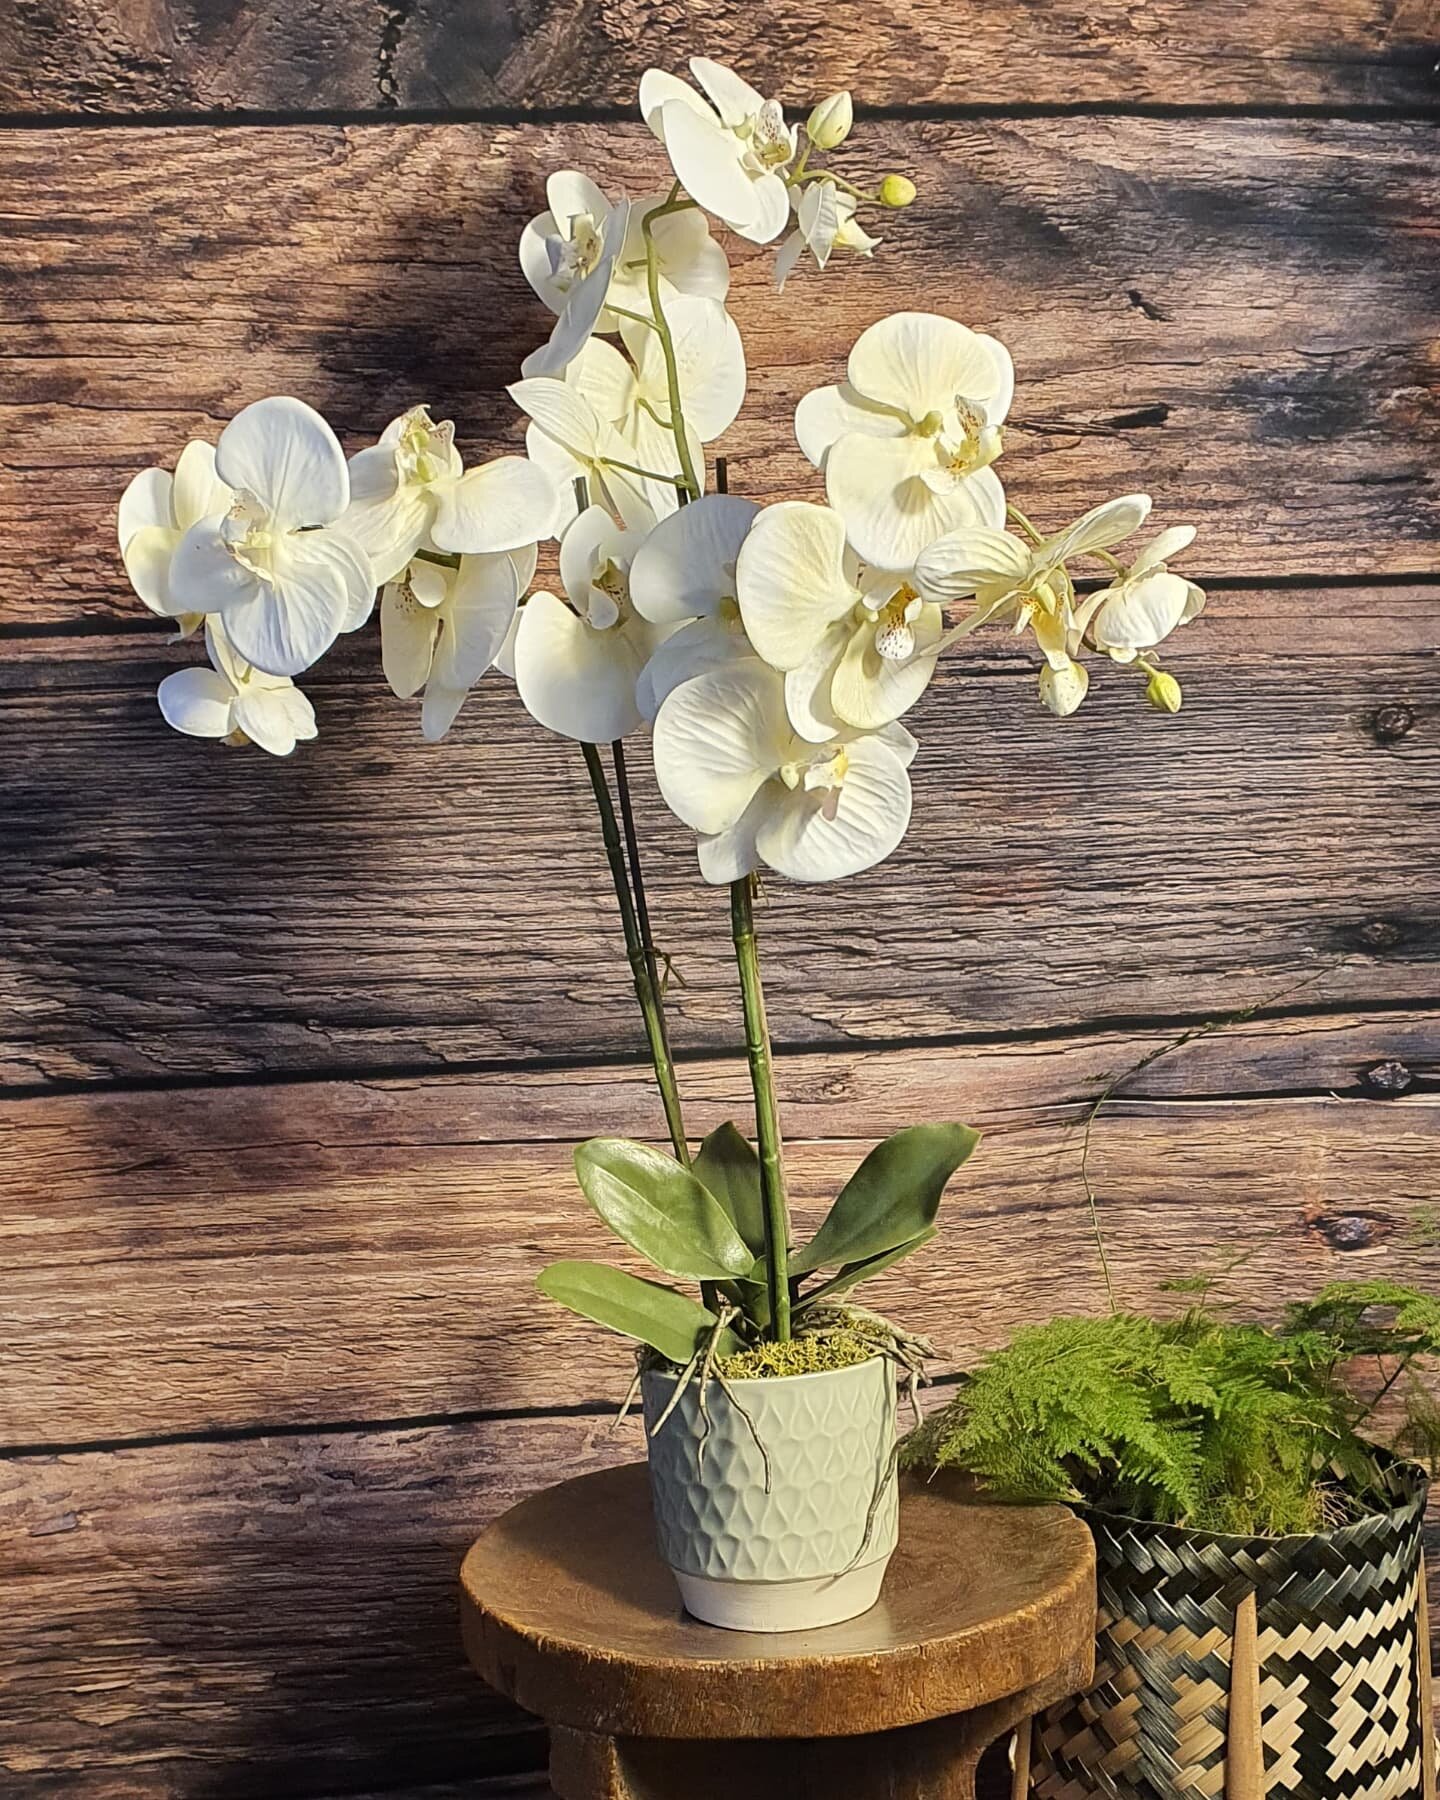 Just had some lighting arrive so that I can take professional product photography (hopefully!). 

This was my first attempt, showing some gorgeous faux orchids.

These will be coming to the website soon. 

In fact, the new online website and store is